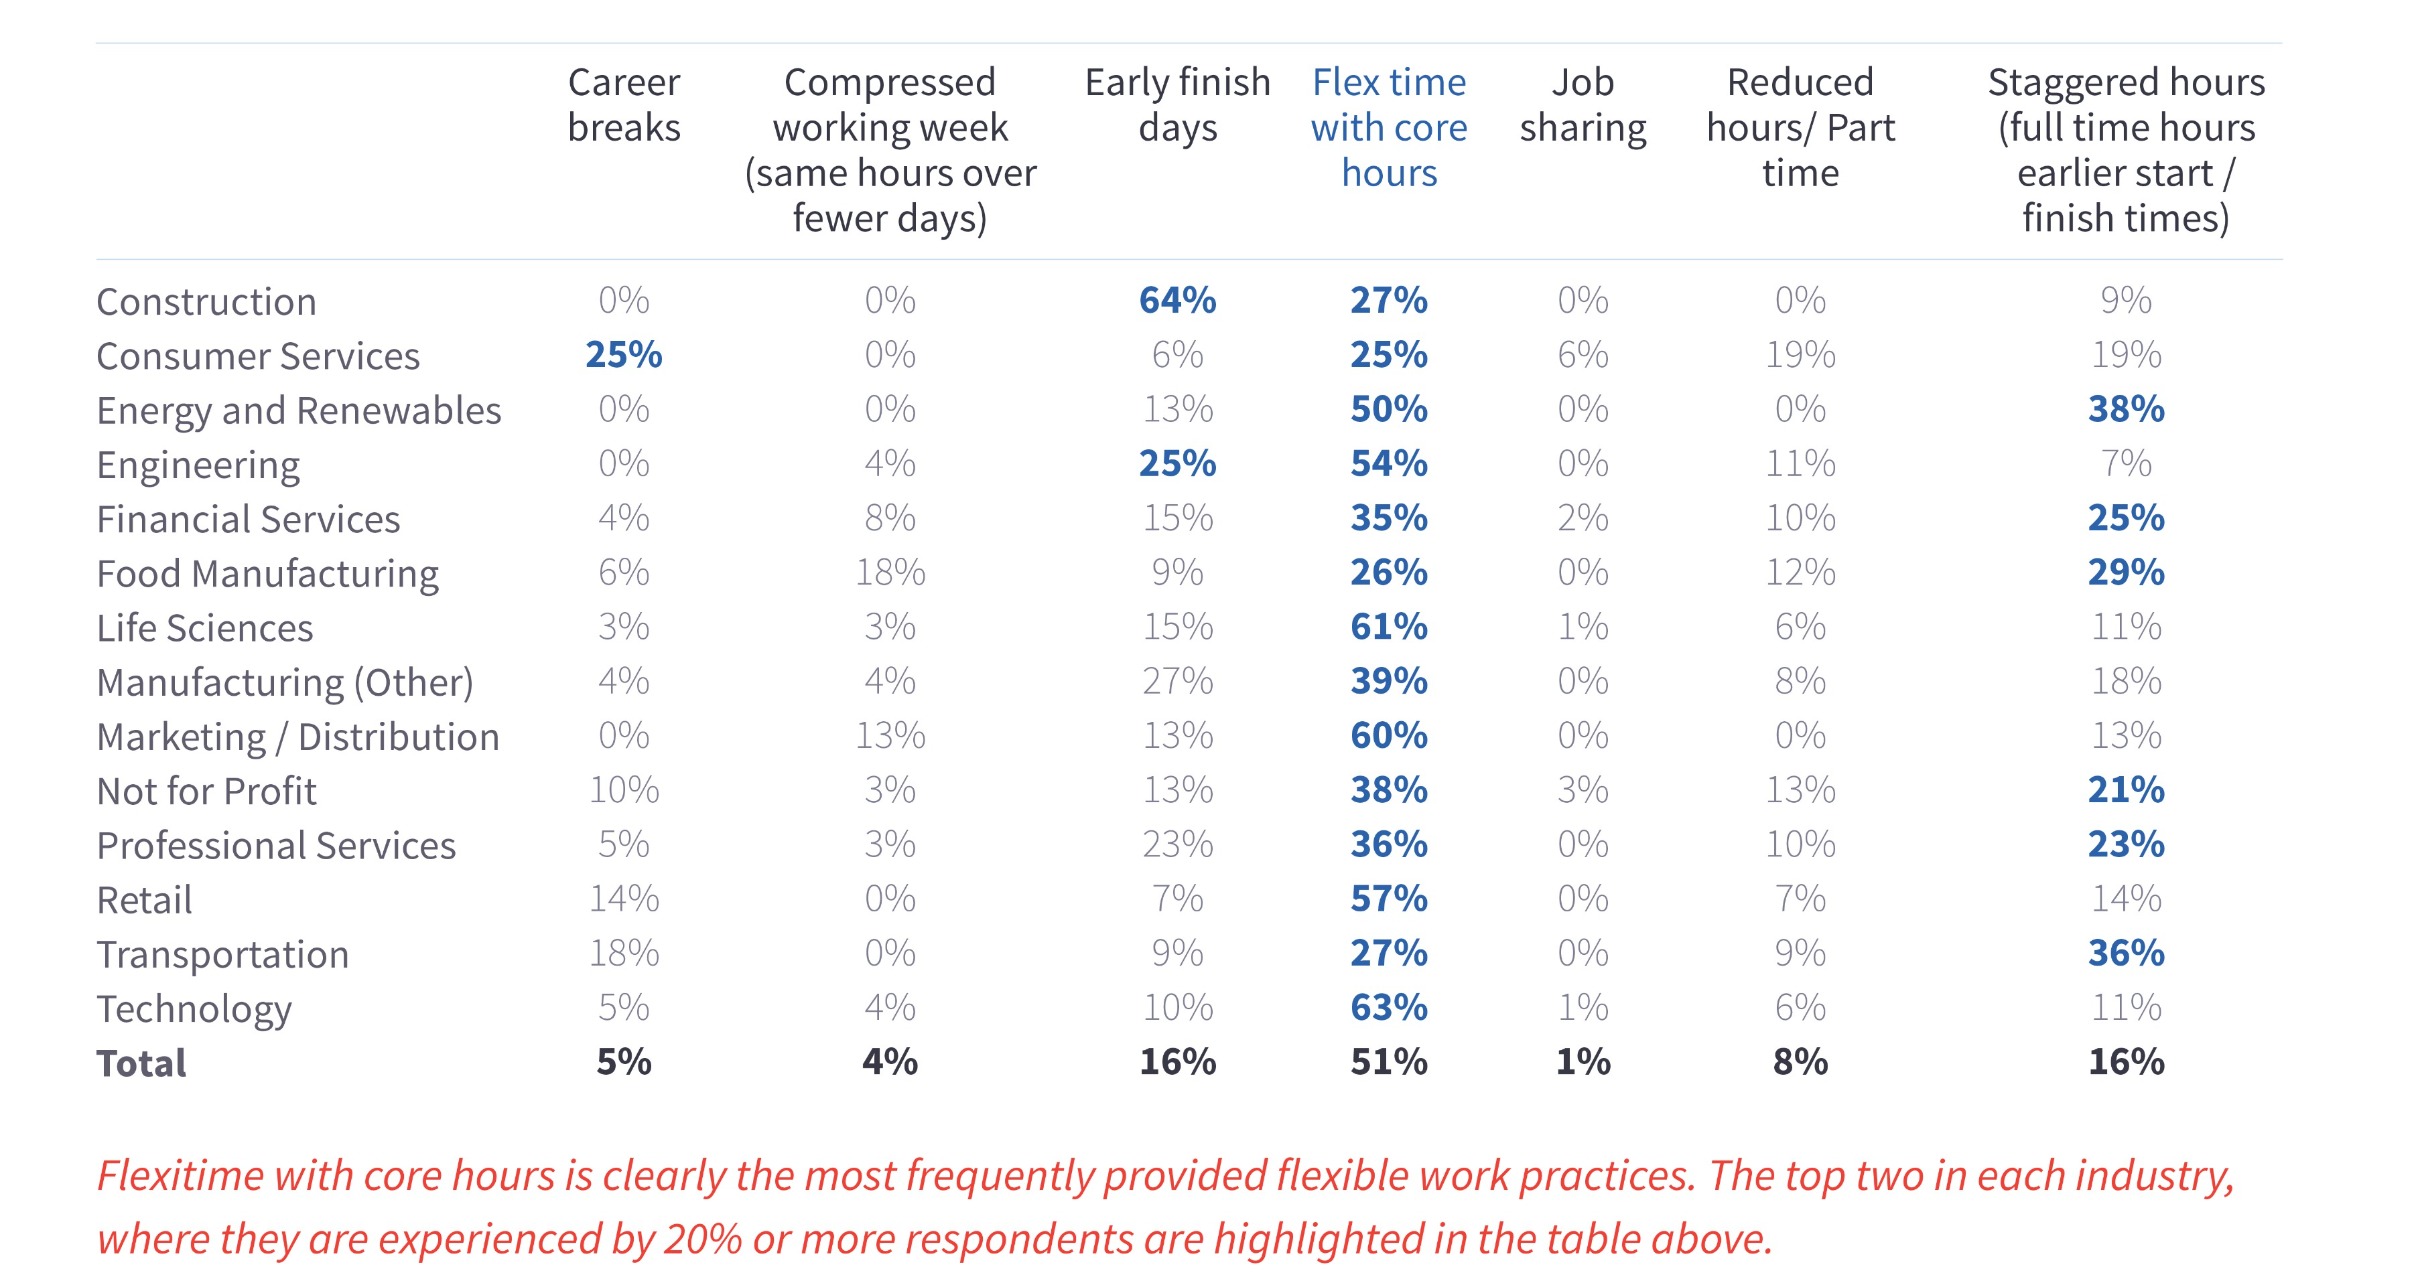 image of survey results for flexible working arrangements